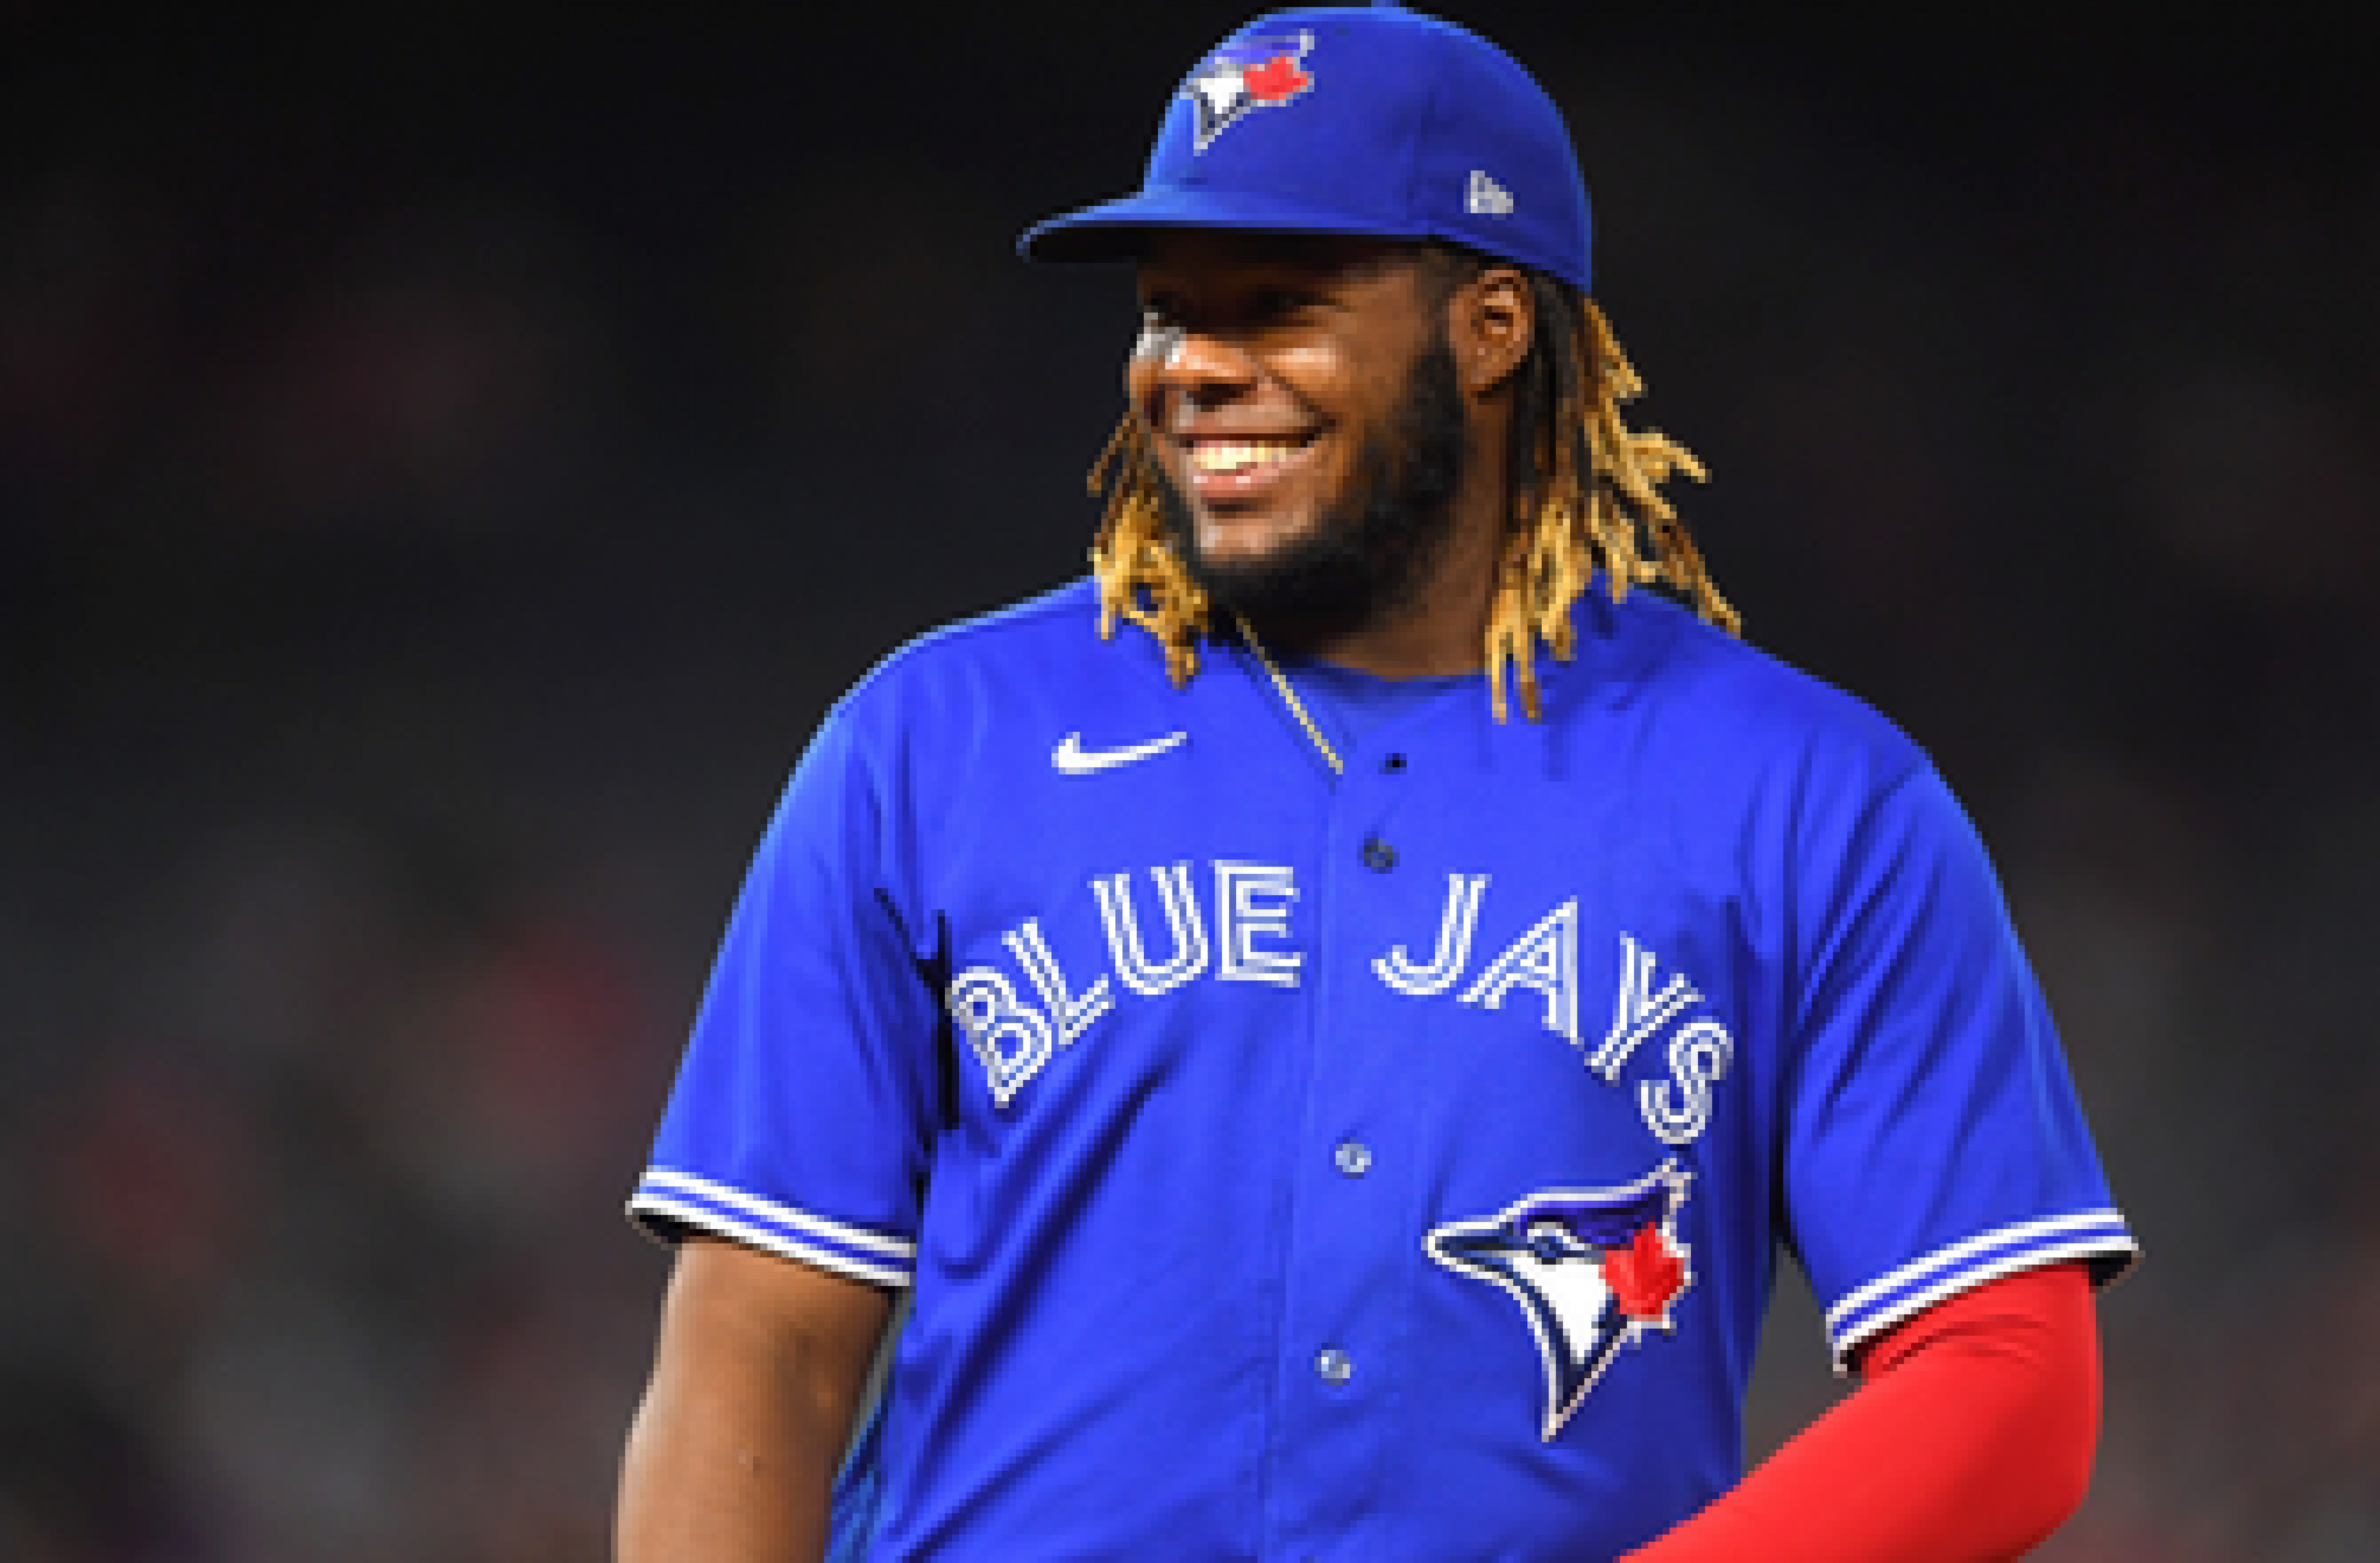 Vladimir Guerrero Jr. and Blue Jays bounce back in 4-0 victory over Angels